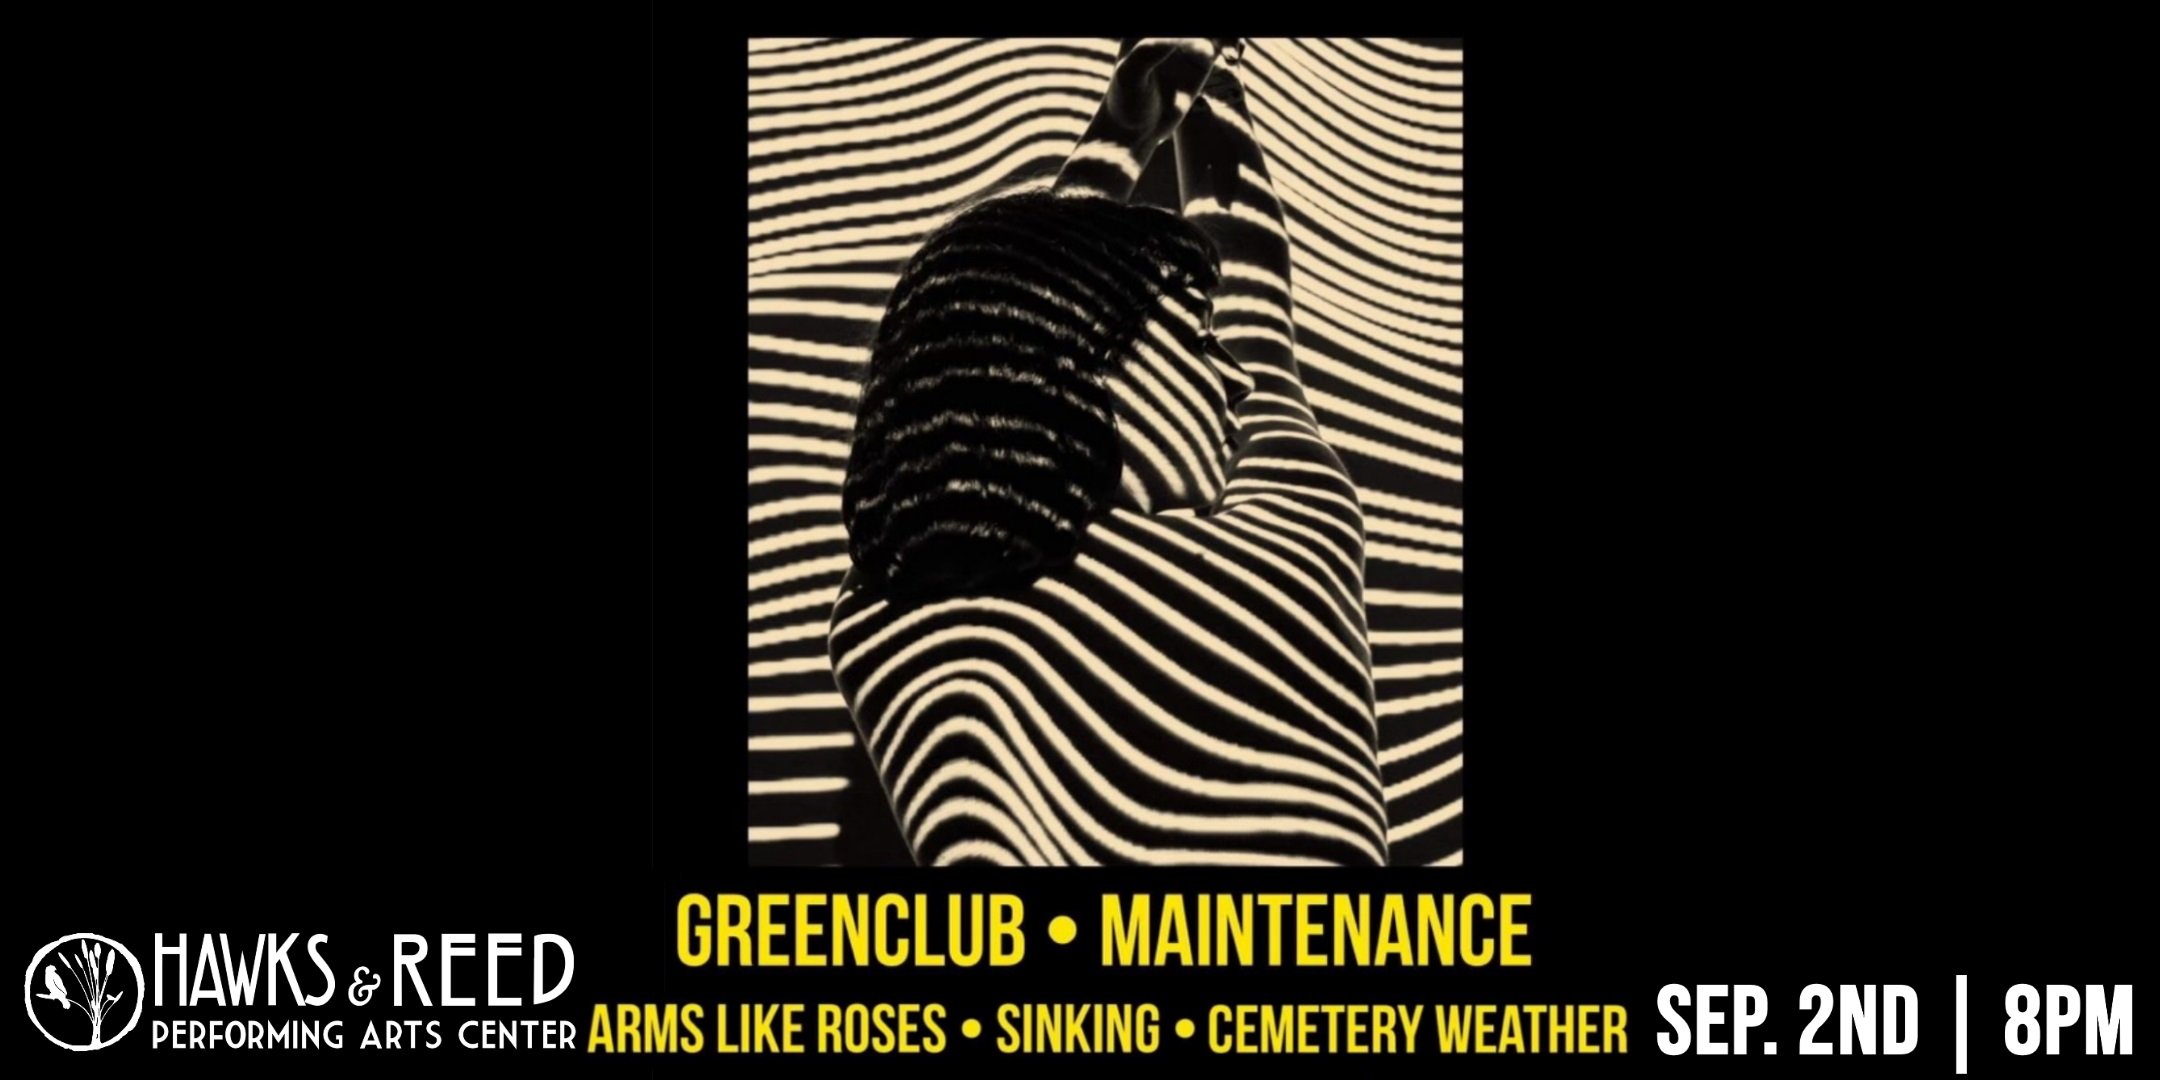 Greenclub / Maintenance / Arms Like Roses / Sinking / Cemetery Weather at Hawks & Reed